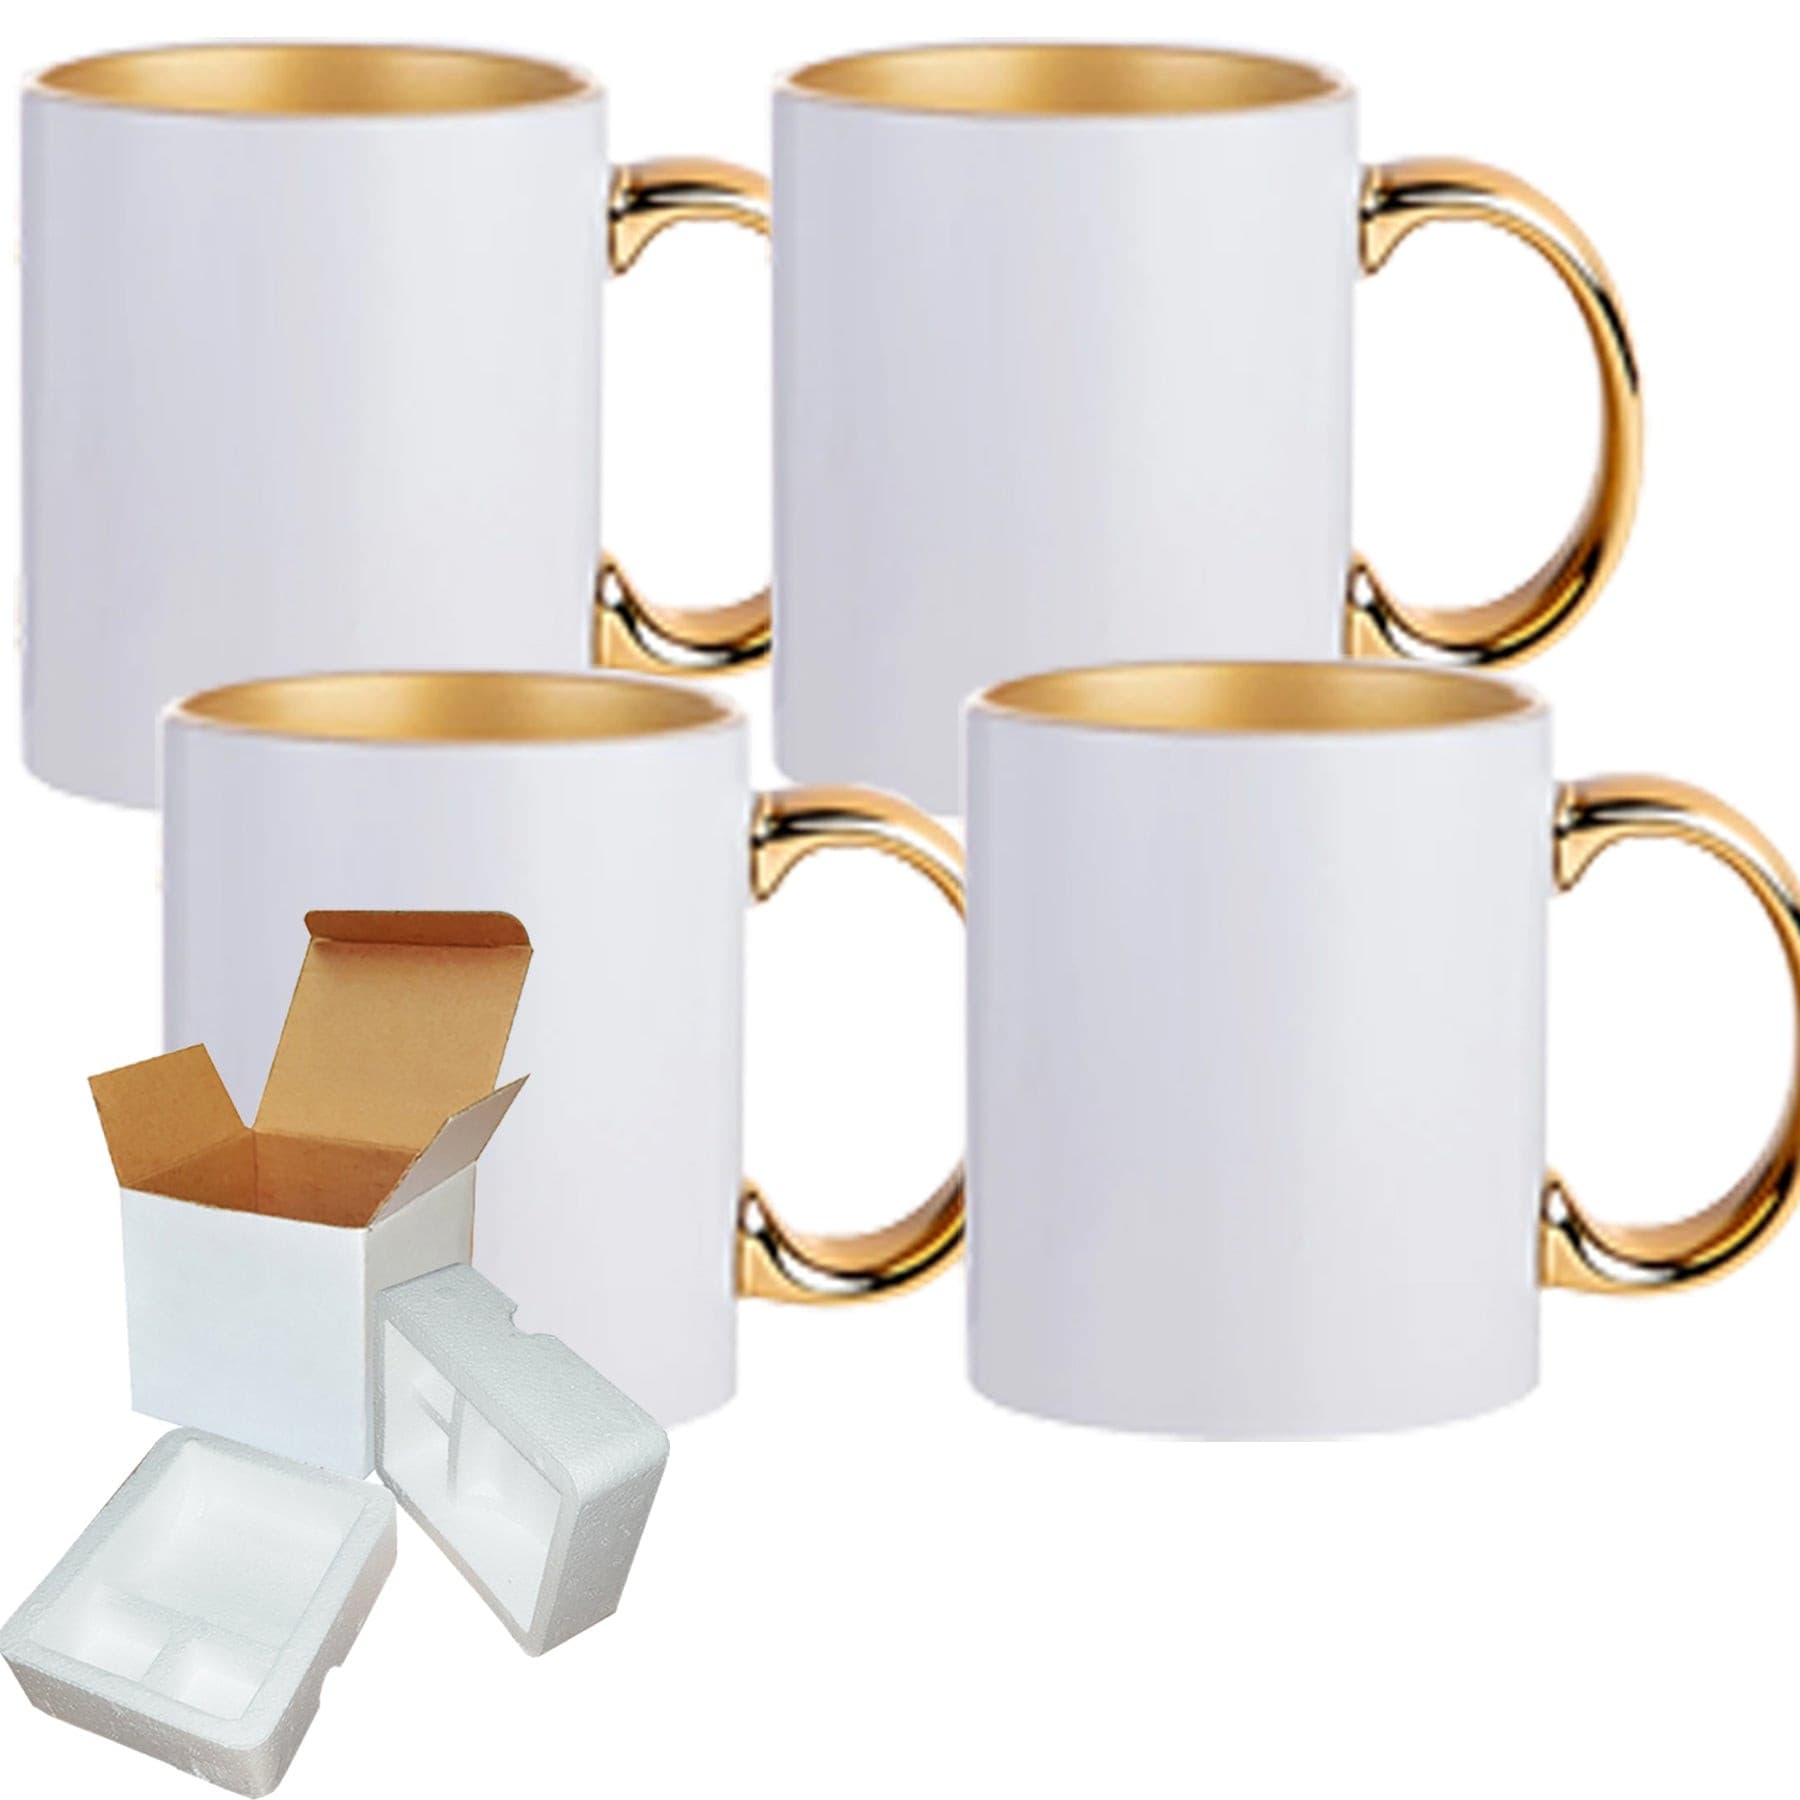 Sublimation Mugs and Drinkware - Professional Quality Blanks